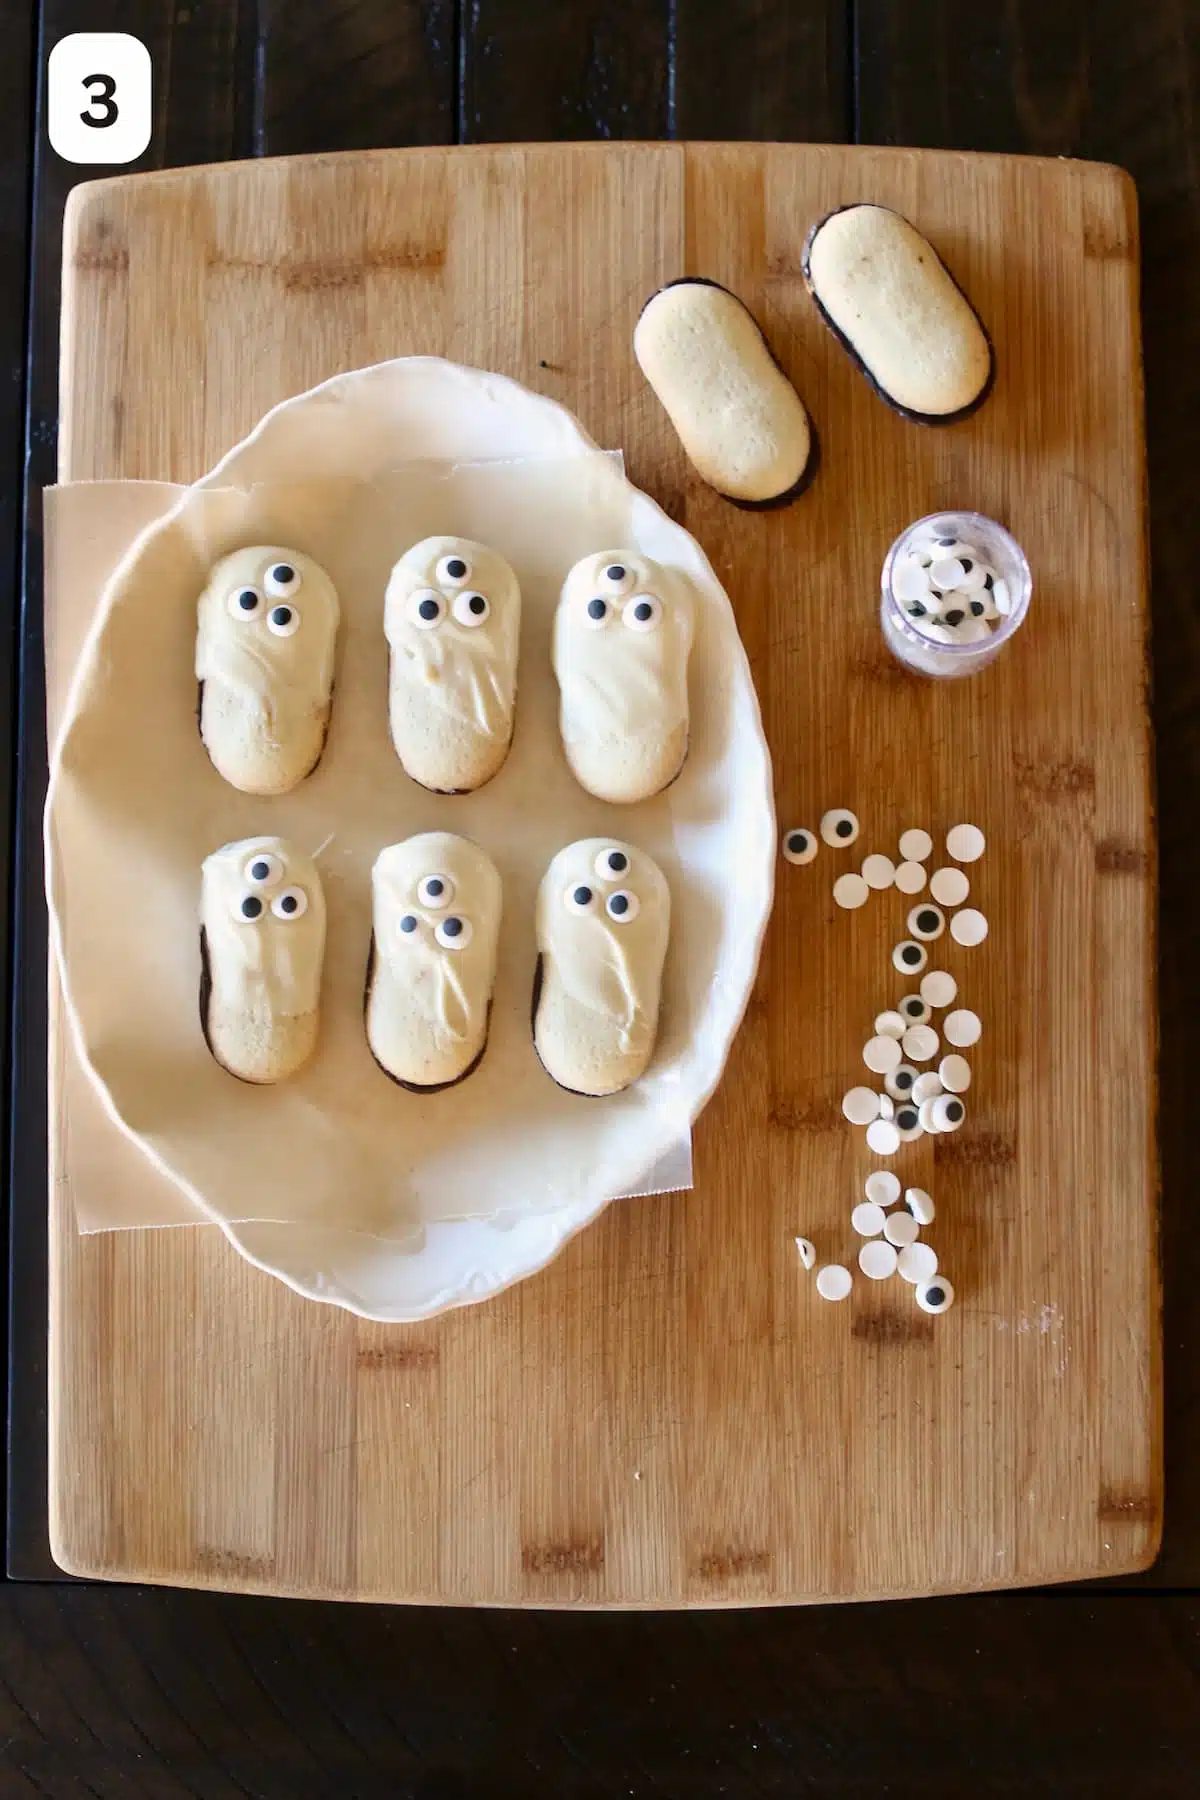 Cookies have been dipped in white chocolate with candy eyes and displayed on a plate.